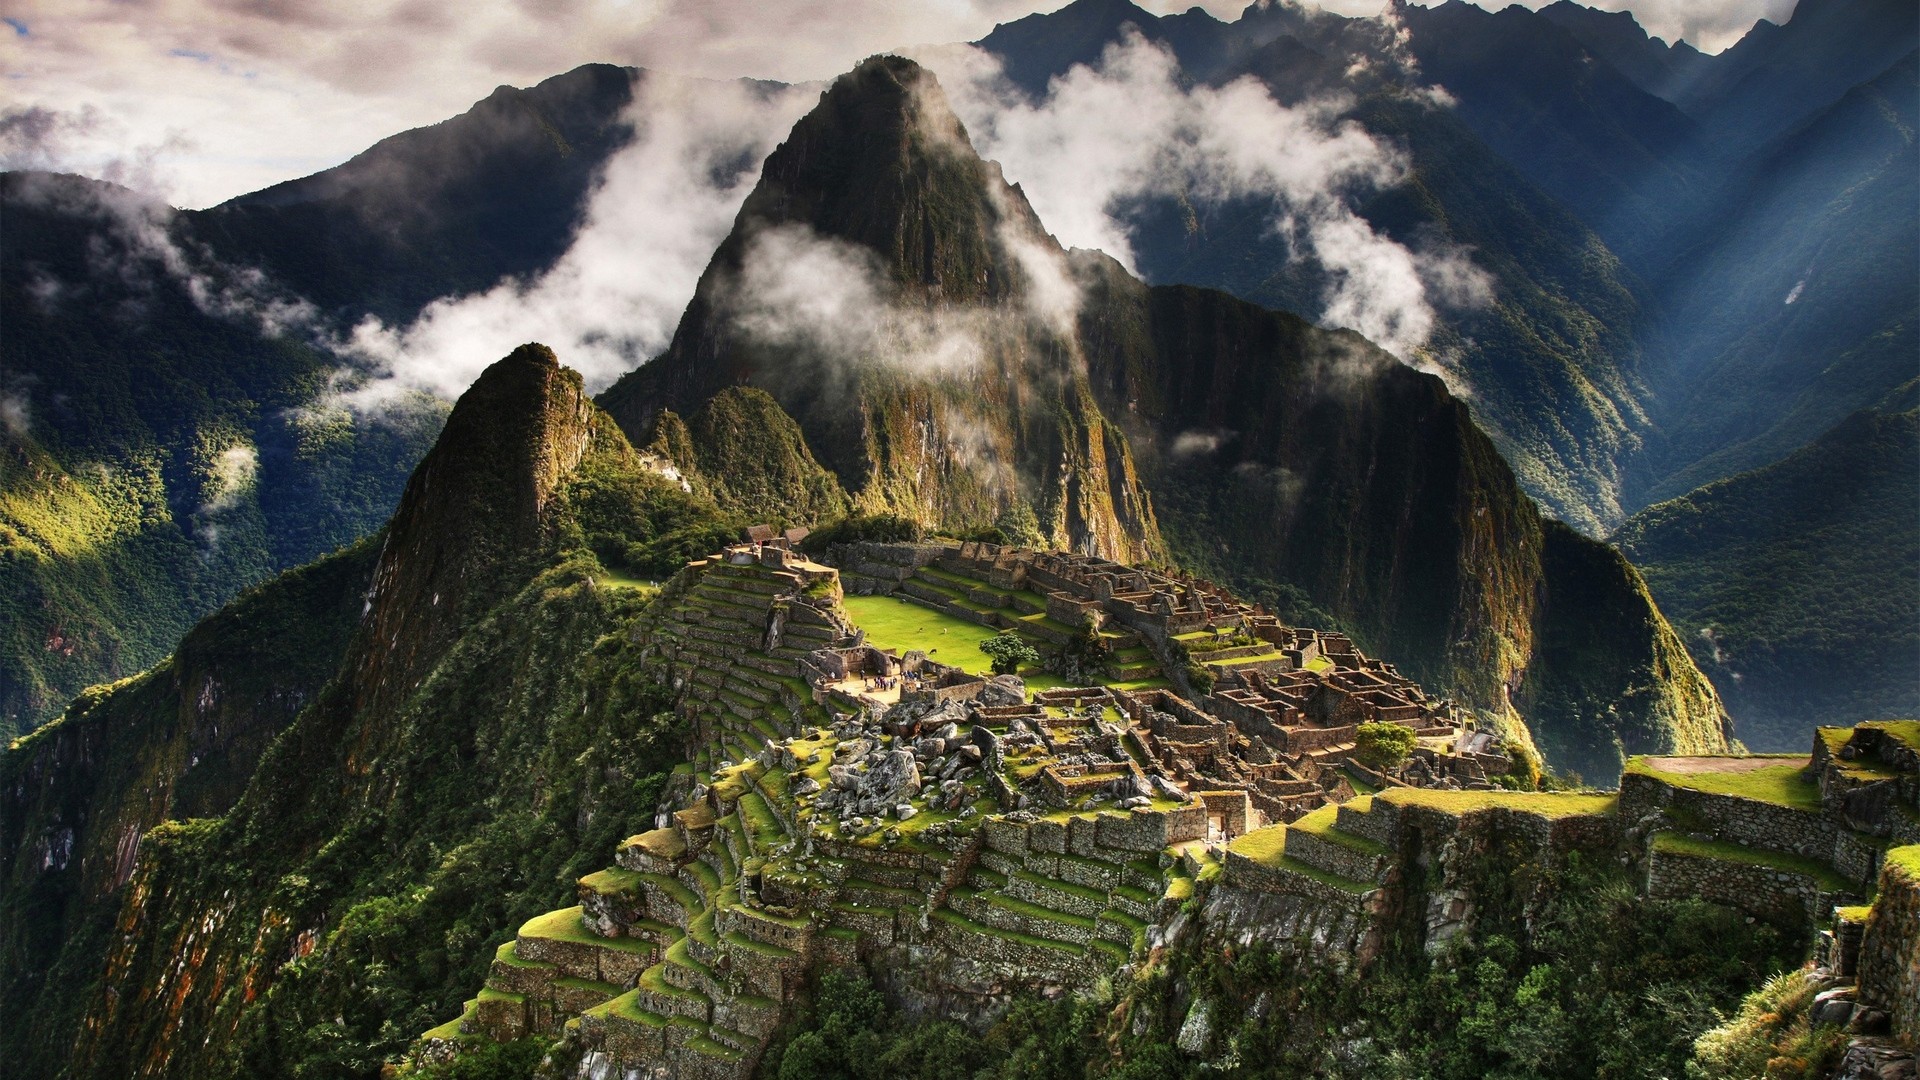 General 1920x1080 nature mountains Machu Picchu landscape old building forest clouds Peru South America history ruins World Heritage Site